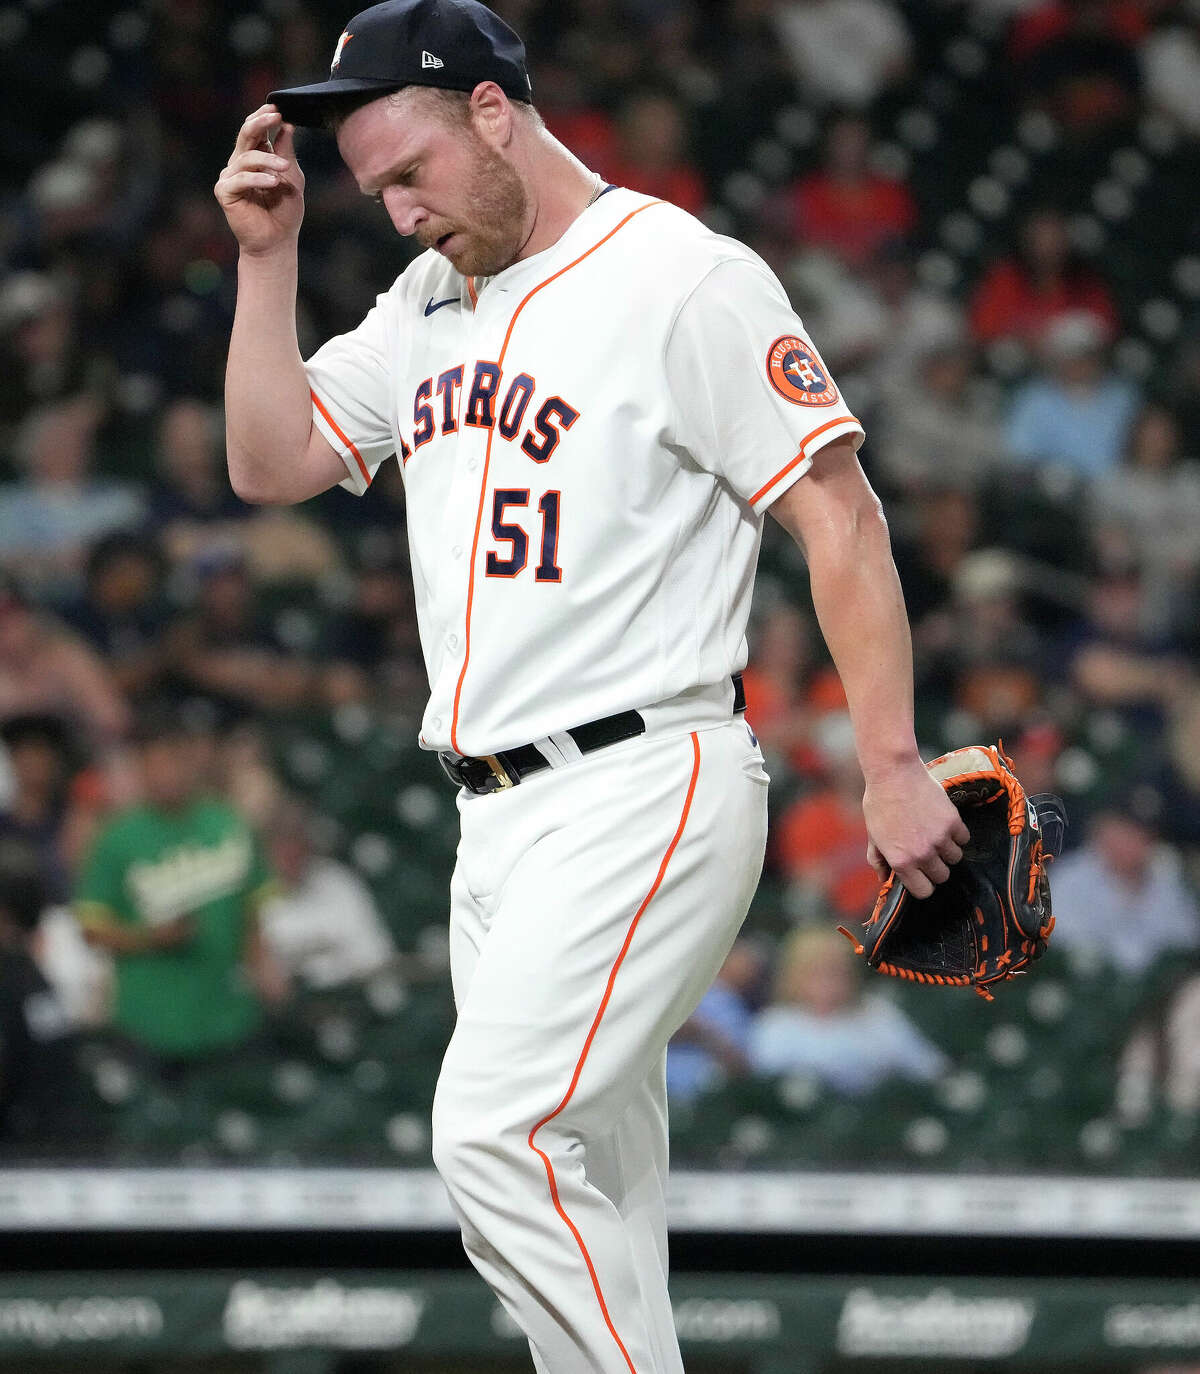 Houston Astros relief pitcher Will Smith (51) reacts as he walked back to the dugout as he was pulled after Oakland Athletics Sean Murphy tripled off of him during the eighth inning of an MLB baseball game at Minute Maid Park on Thursday, Sept. 15, 2022 in Houston.